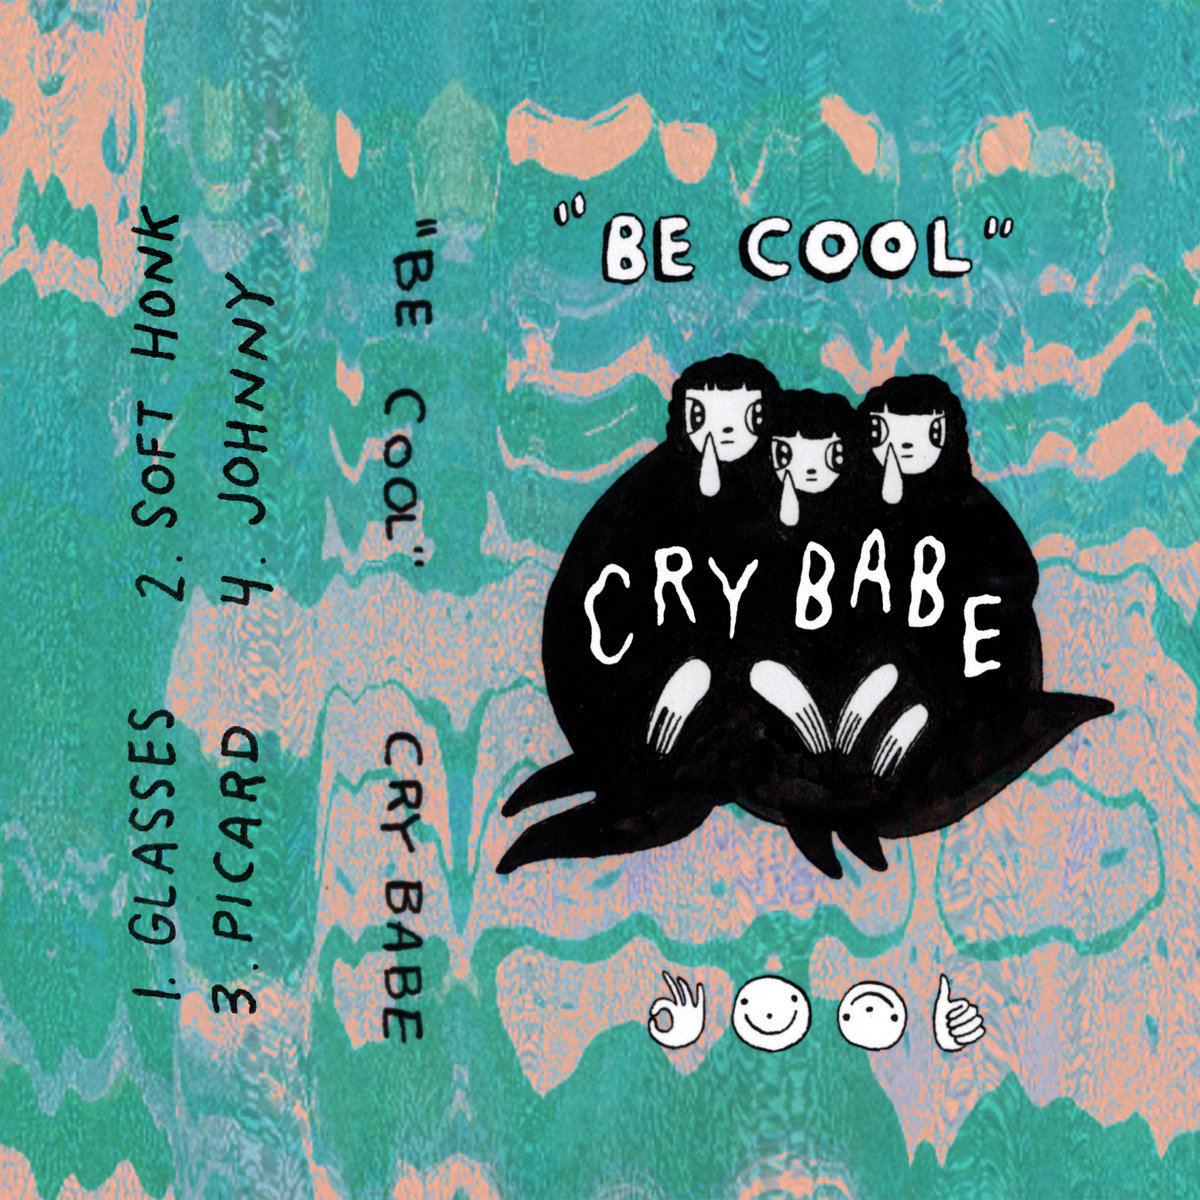 Cry Babe be cool album art